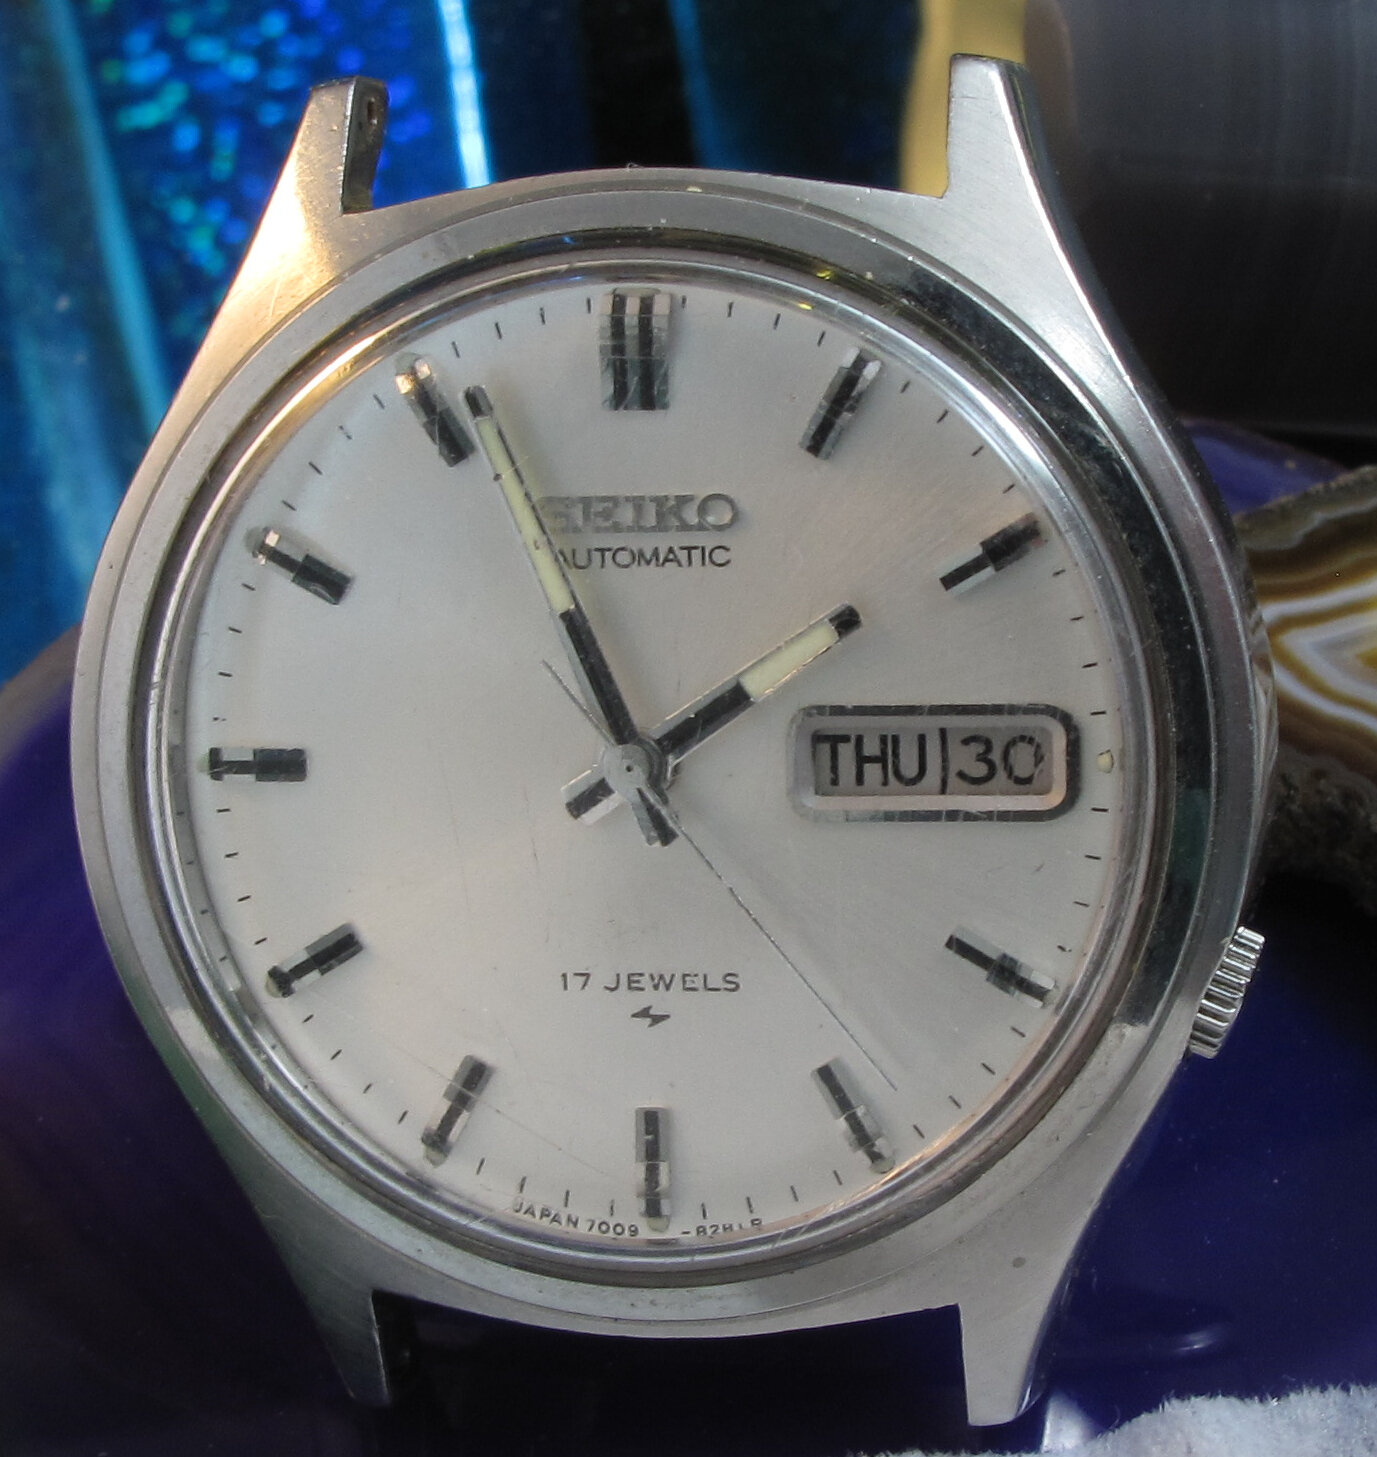 SEIKO 70セイコークロノグラフ 曜送り爪 Day finger Calibre:7009A 